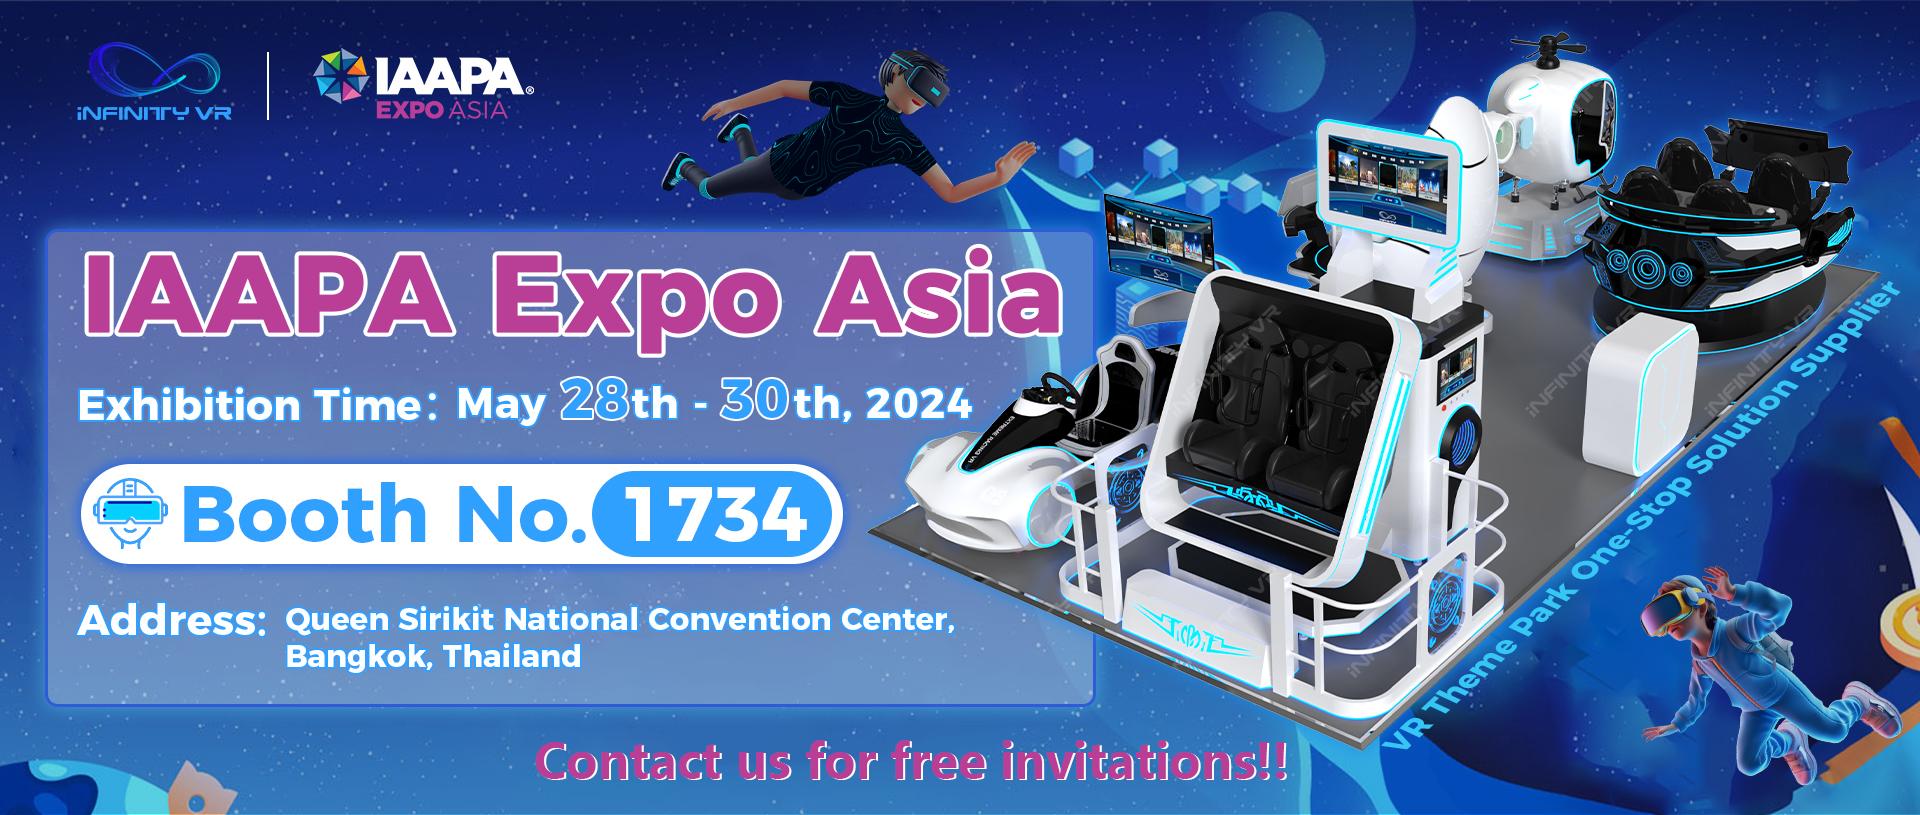 Welcome to IAAPA Asia Expo On May 28-30th. Leave messages to visit us.